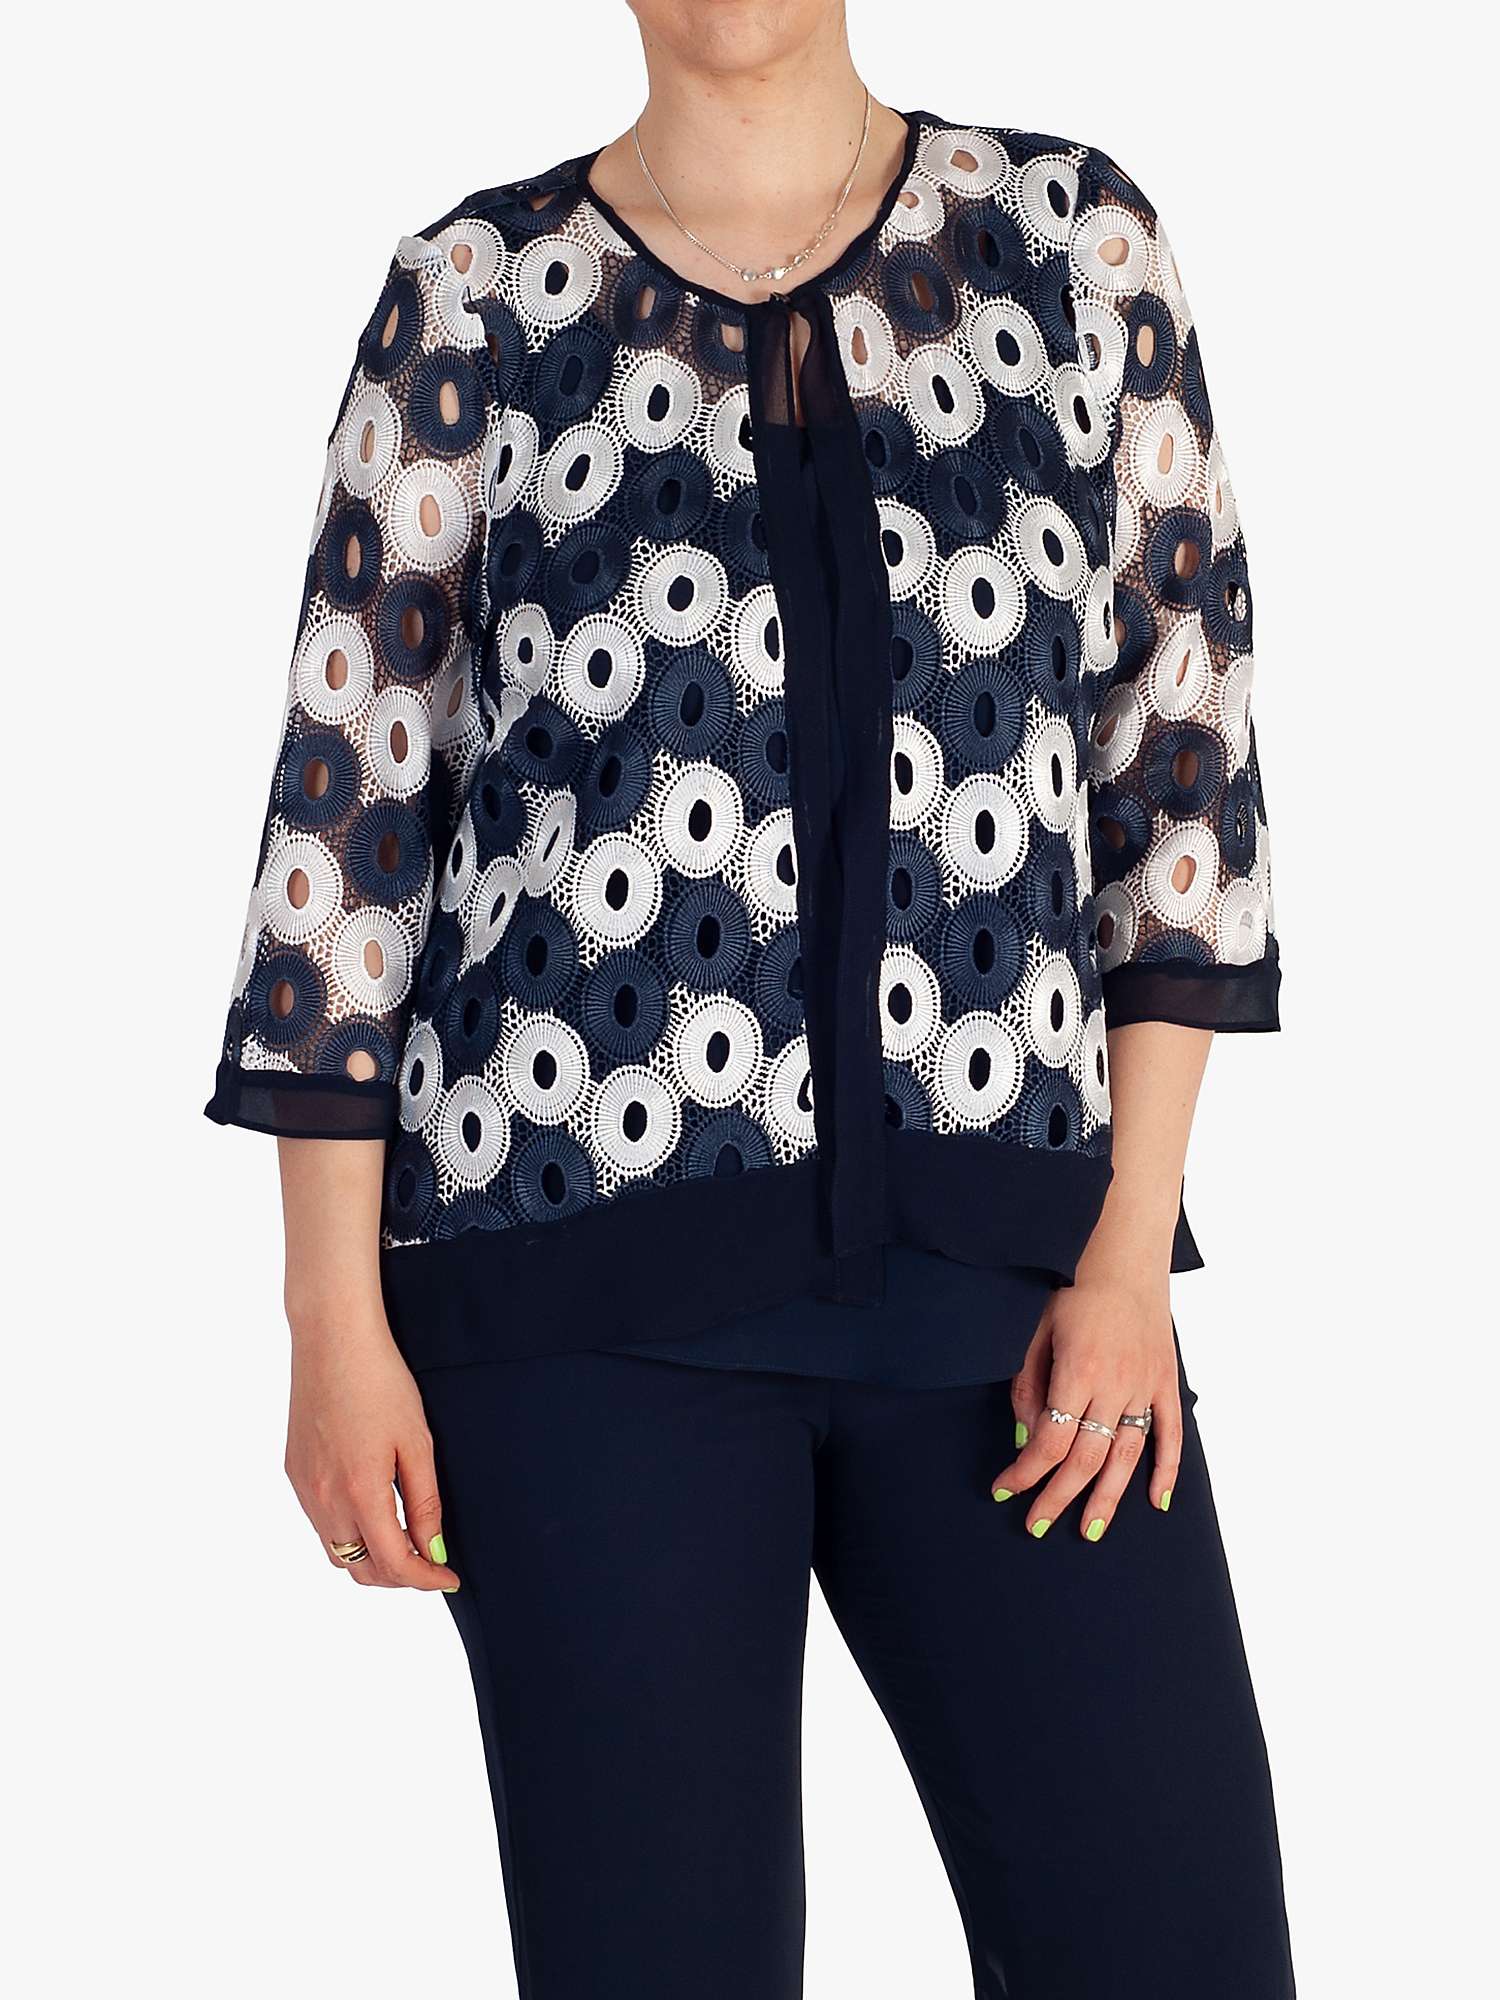 Buy chesca Circle Lace Jacket, Navy/Ivory Online at johnlewis.com